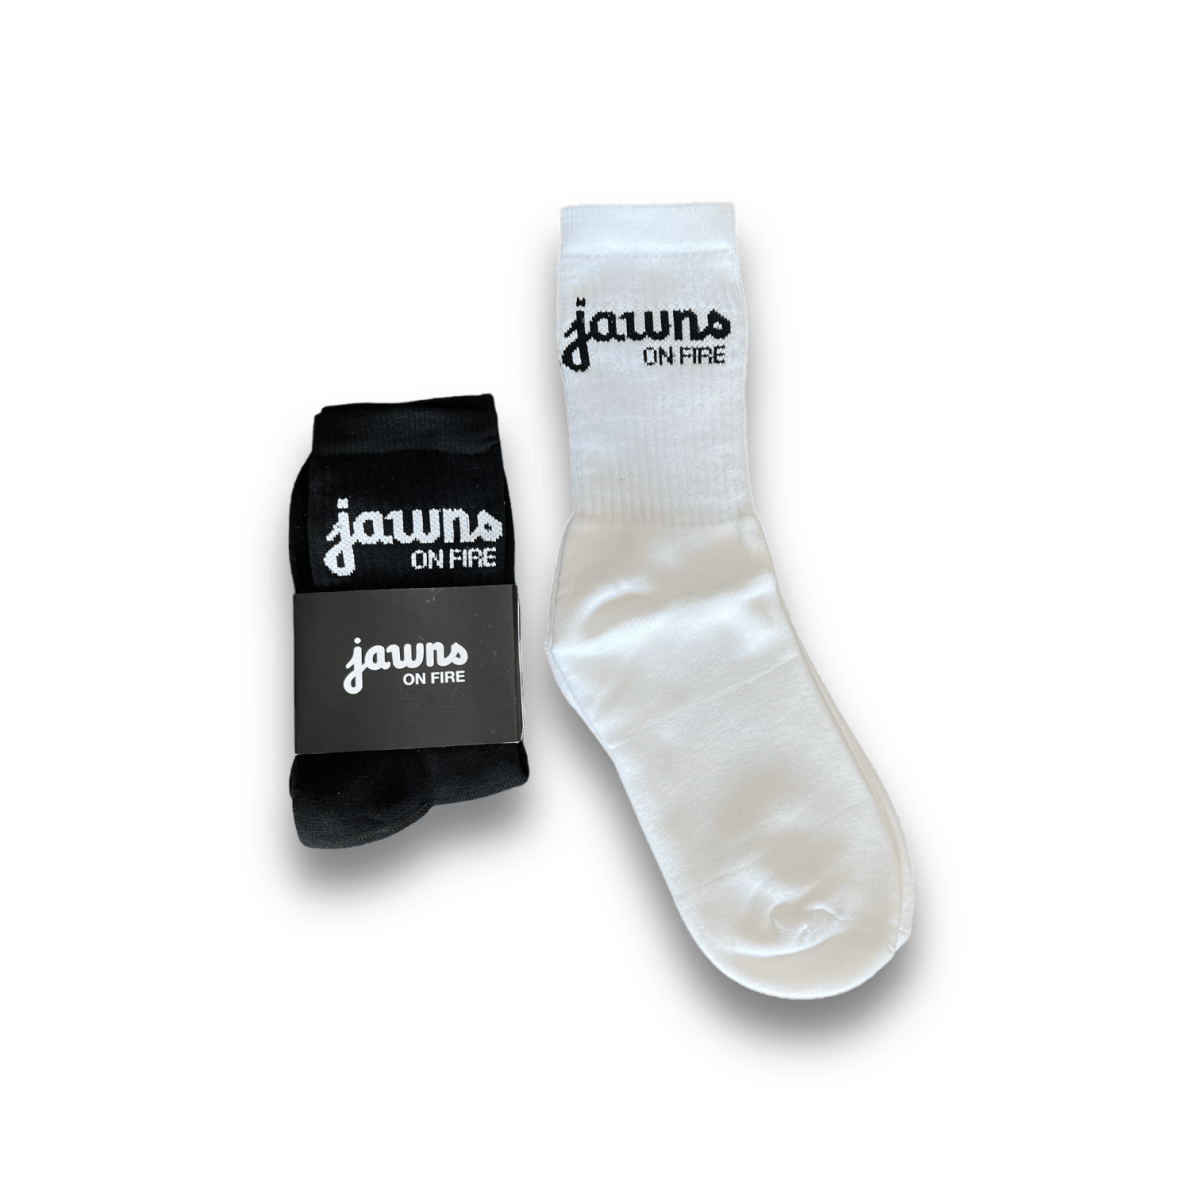 Jawns on Fire ‘Everyday’ Socks by Major Prep - Clothing - Jawns on Fire Sneakers & Streetwear